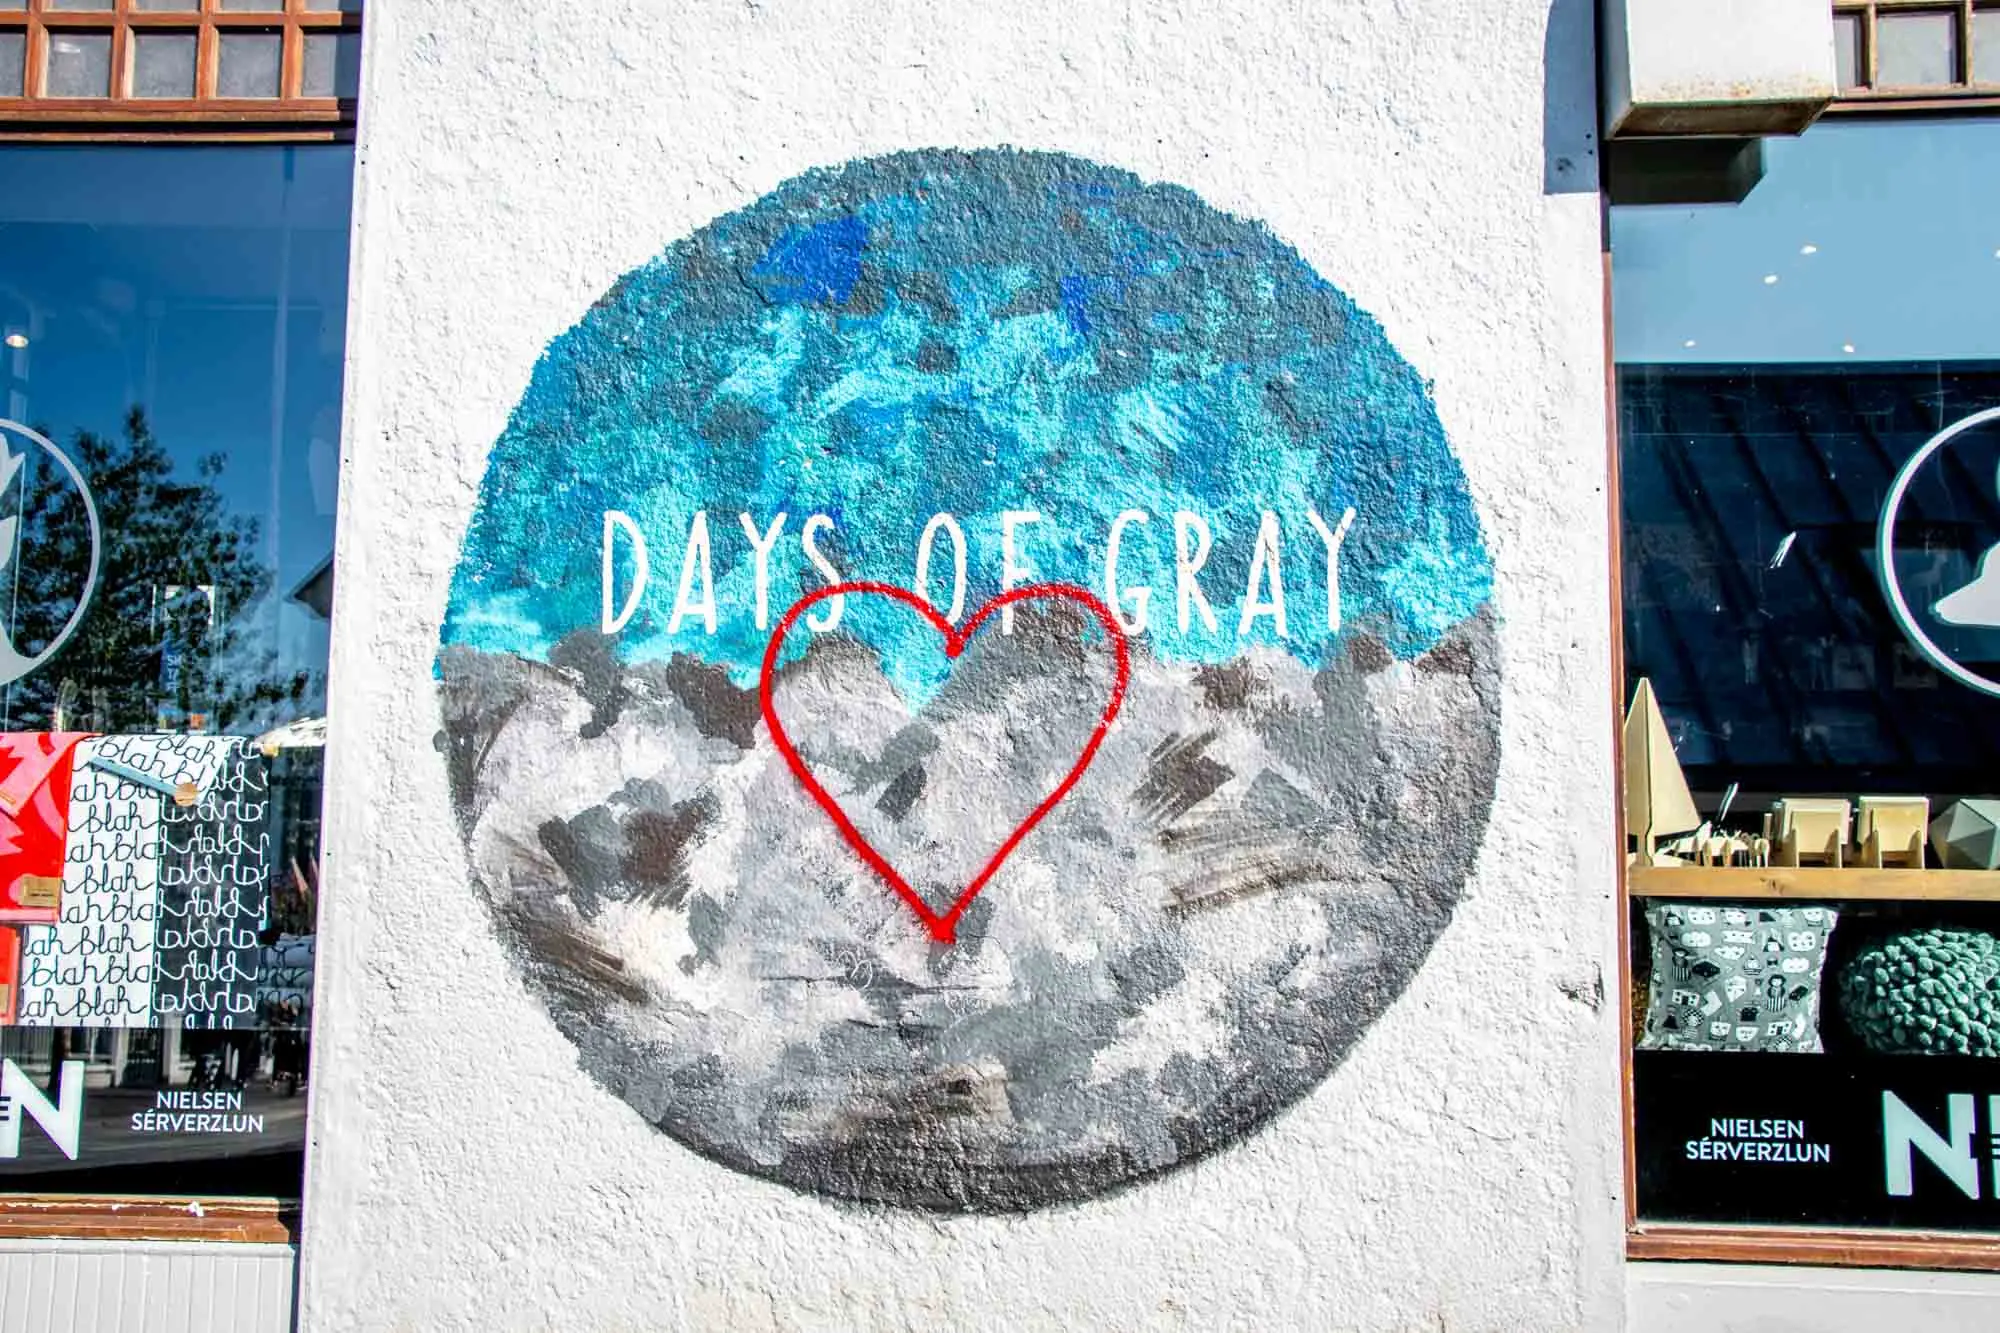 Mural with heart saying "Days of Gray" in Reykjavik